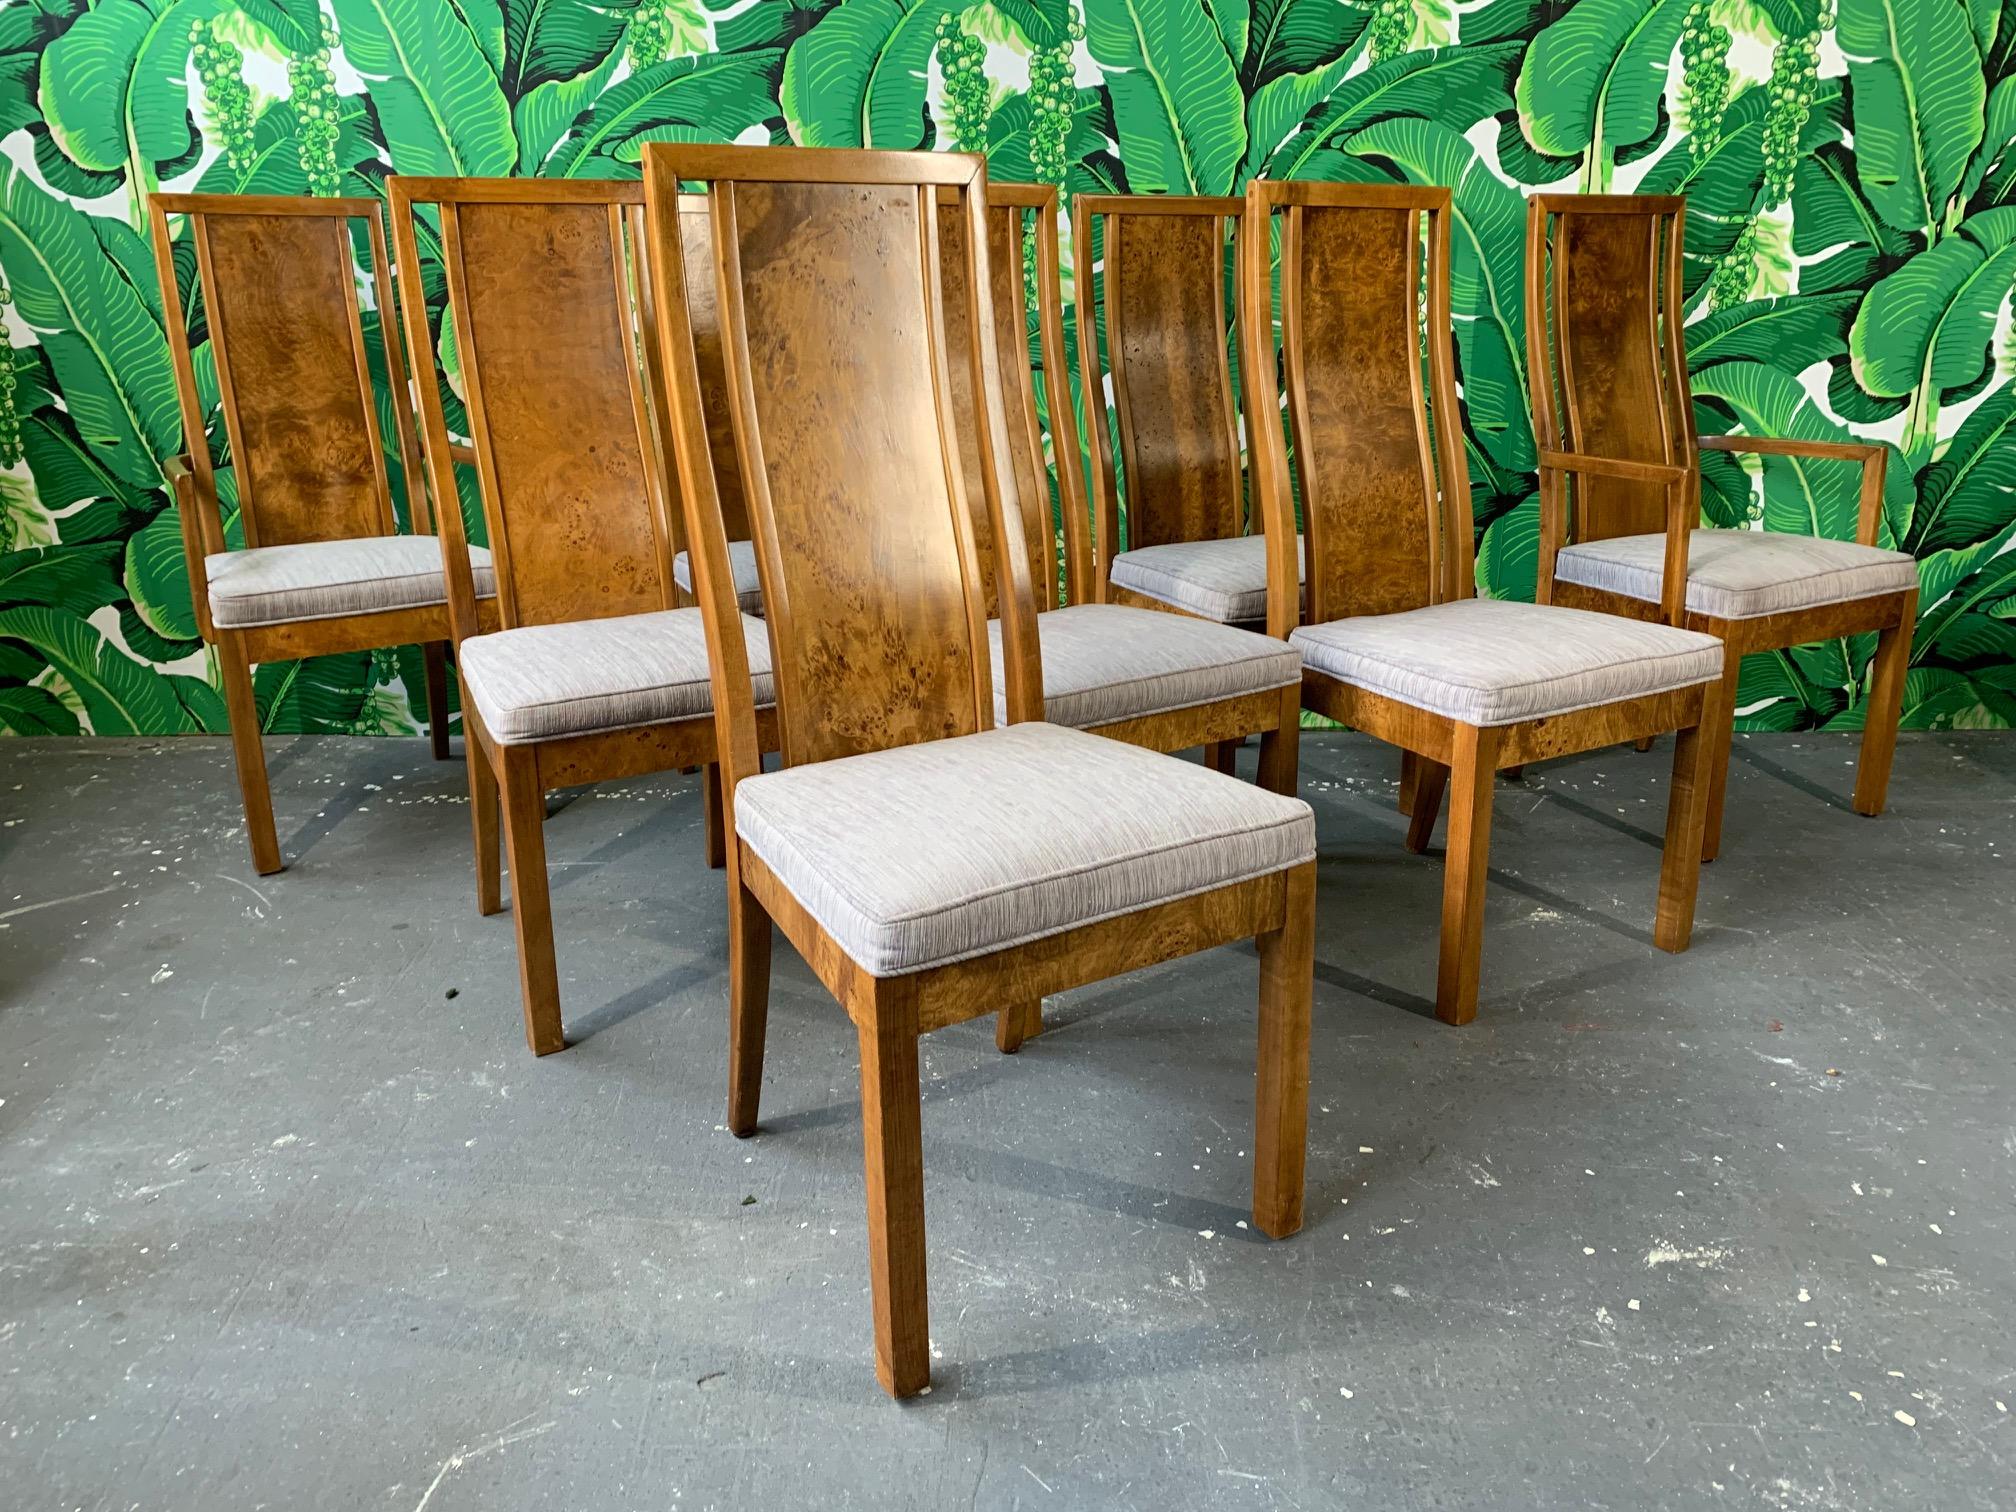 Set of eight burled elm wood dining chairs by Founders furniture for Thomasville, circa 1975. Includes 2 armchairs and 4 side chairs. Very good condition with only very minor signs of age appropriate wear.
Side chairs measure 19.5